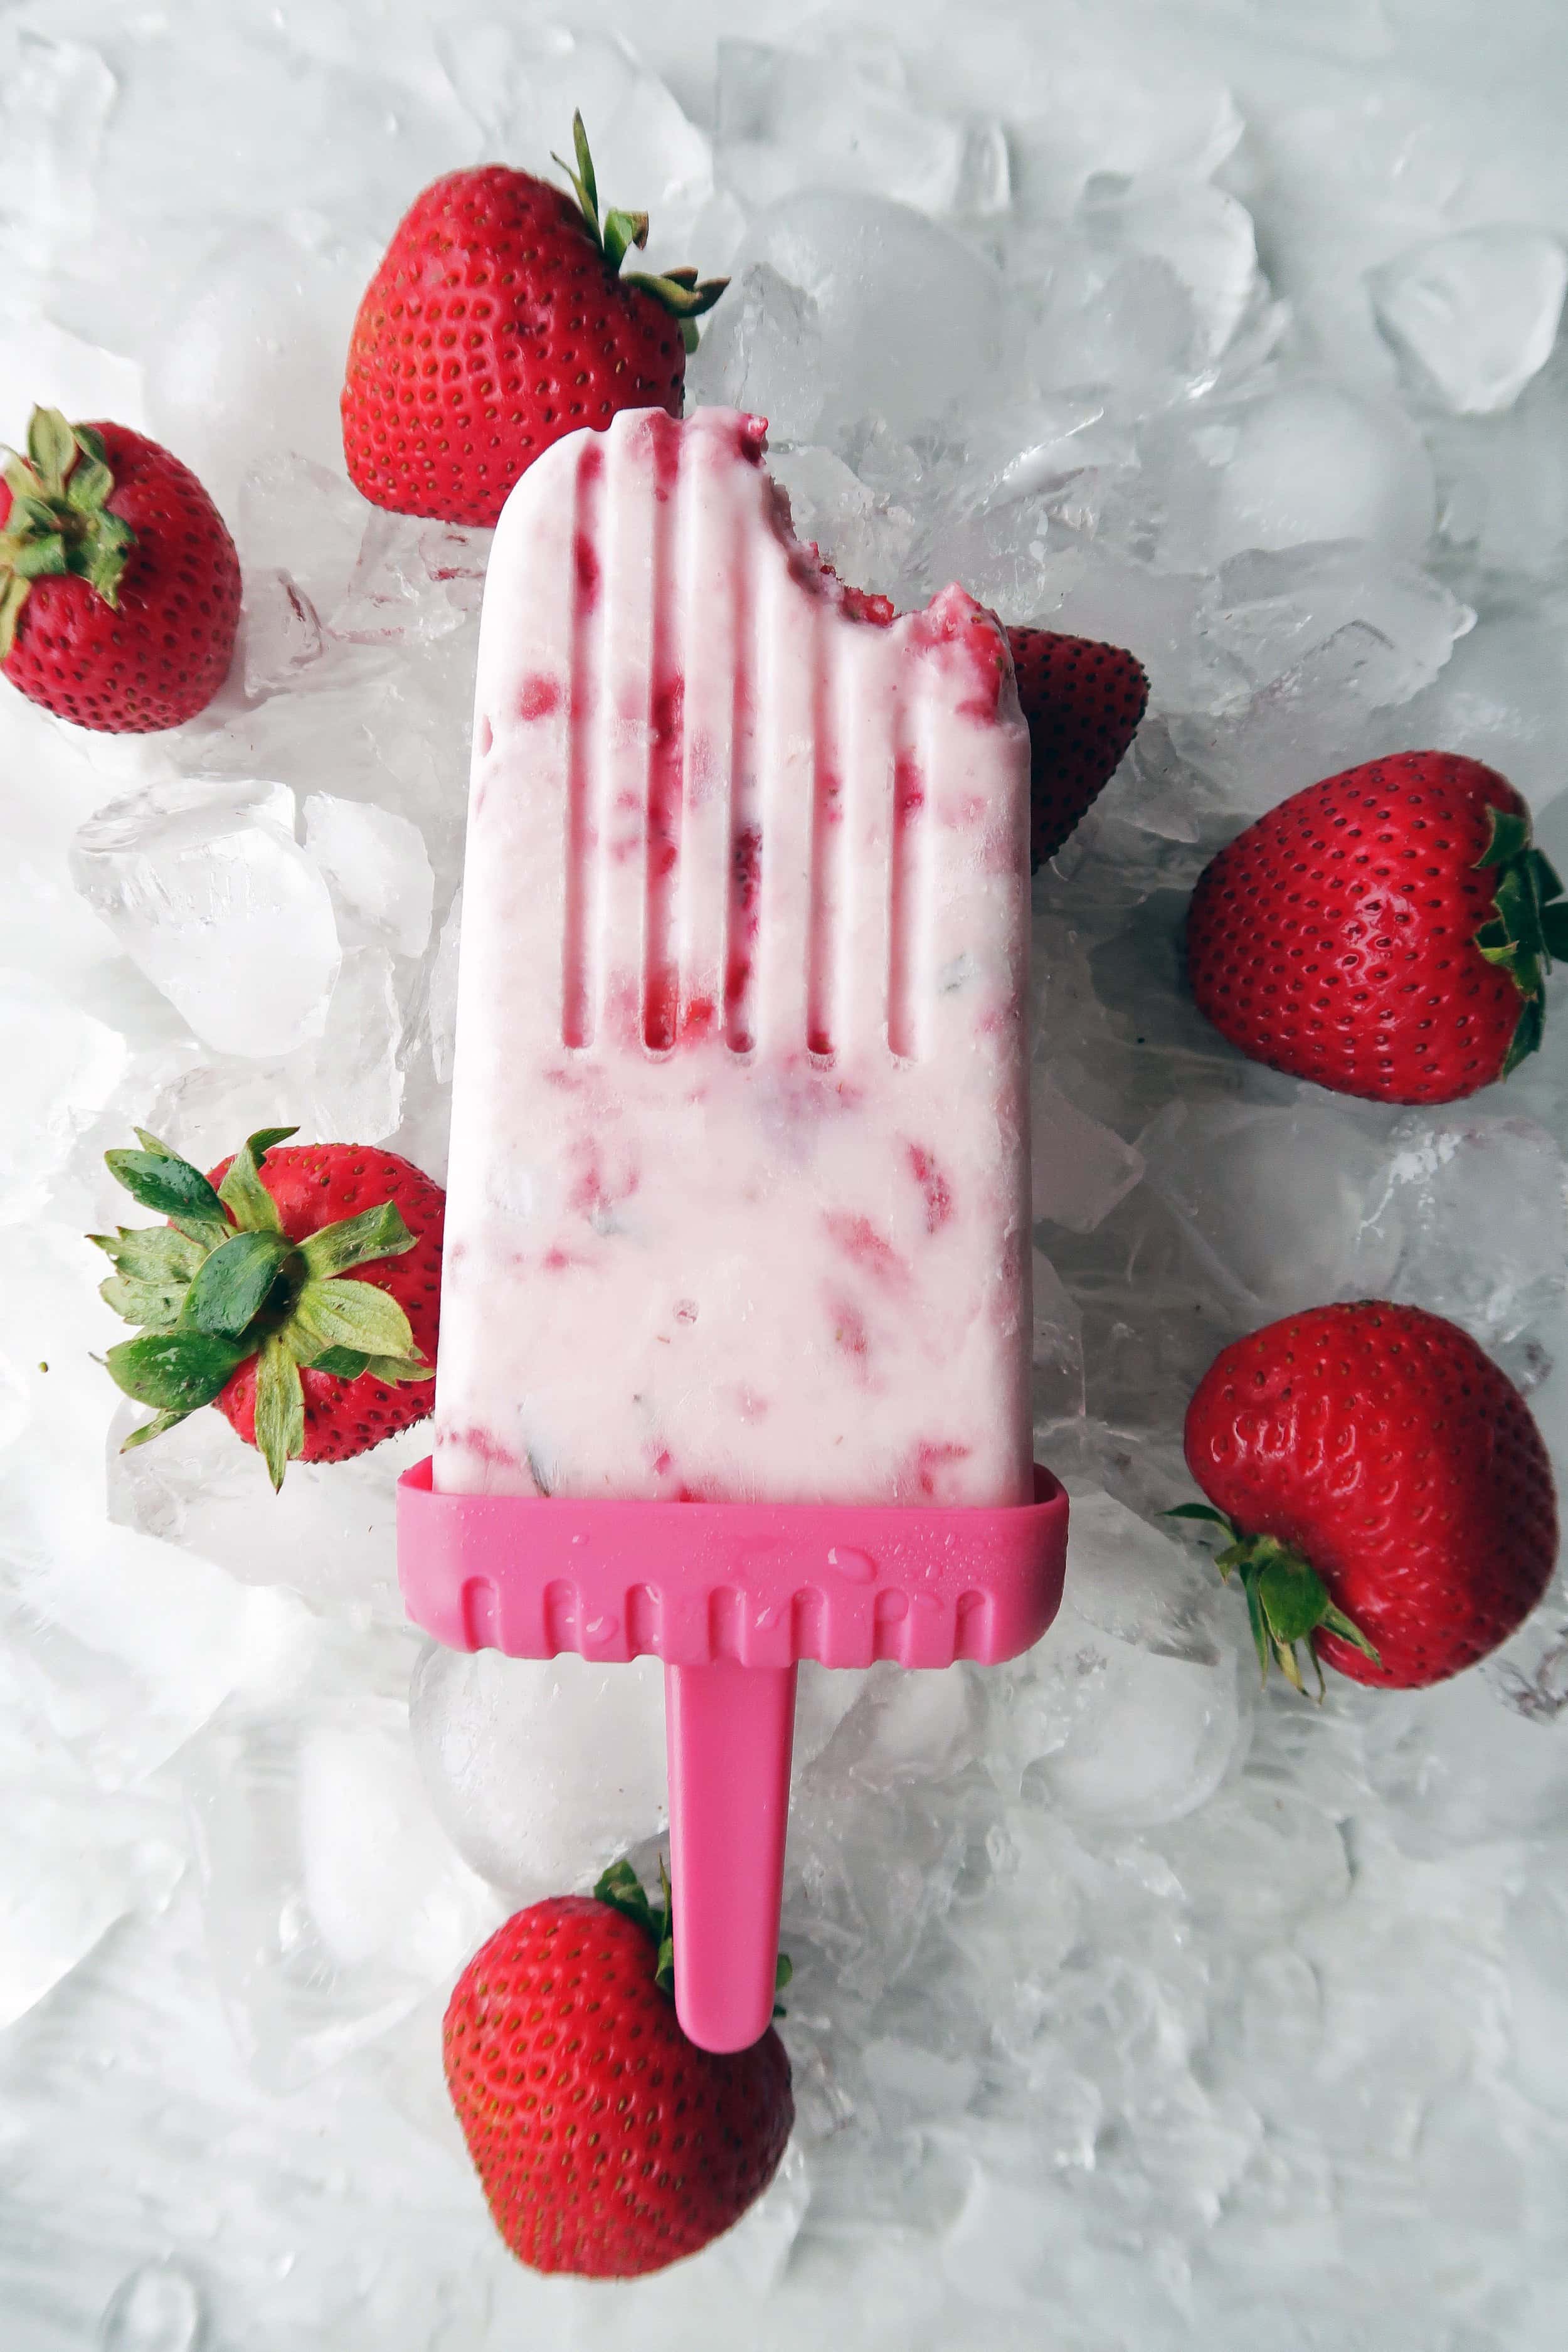 A Fresh Strawberry Mint Yogurt Popsicle with a bite taken that placed on a bed of ice with strawberries around it.